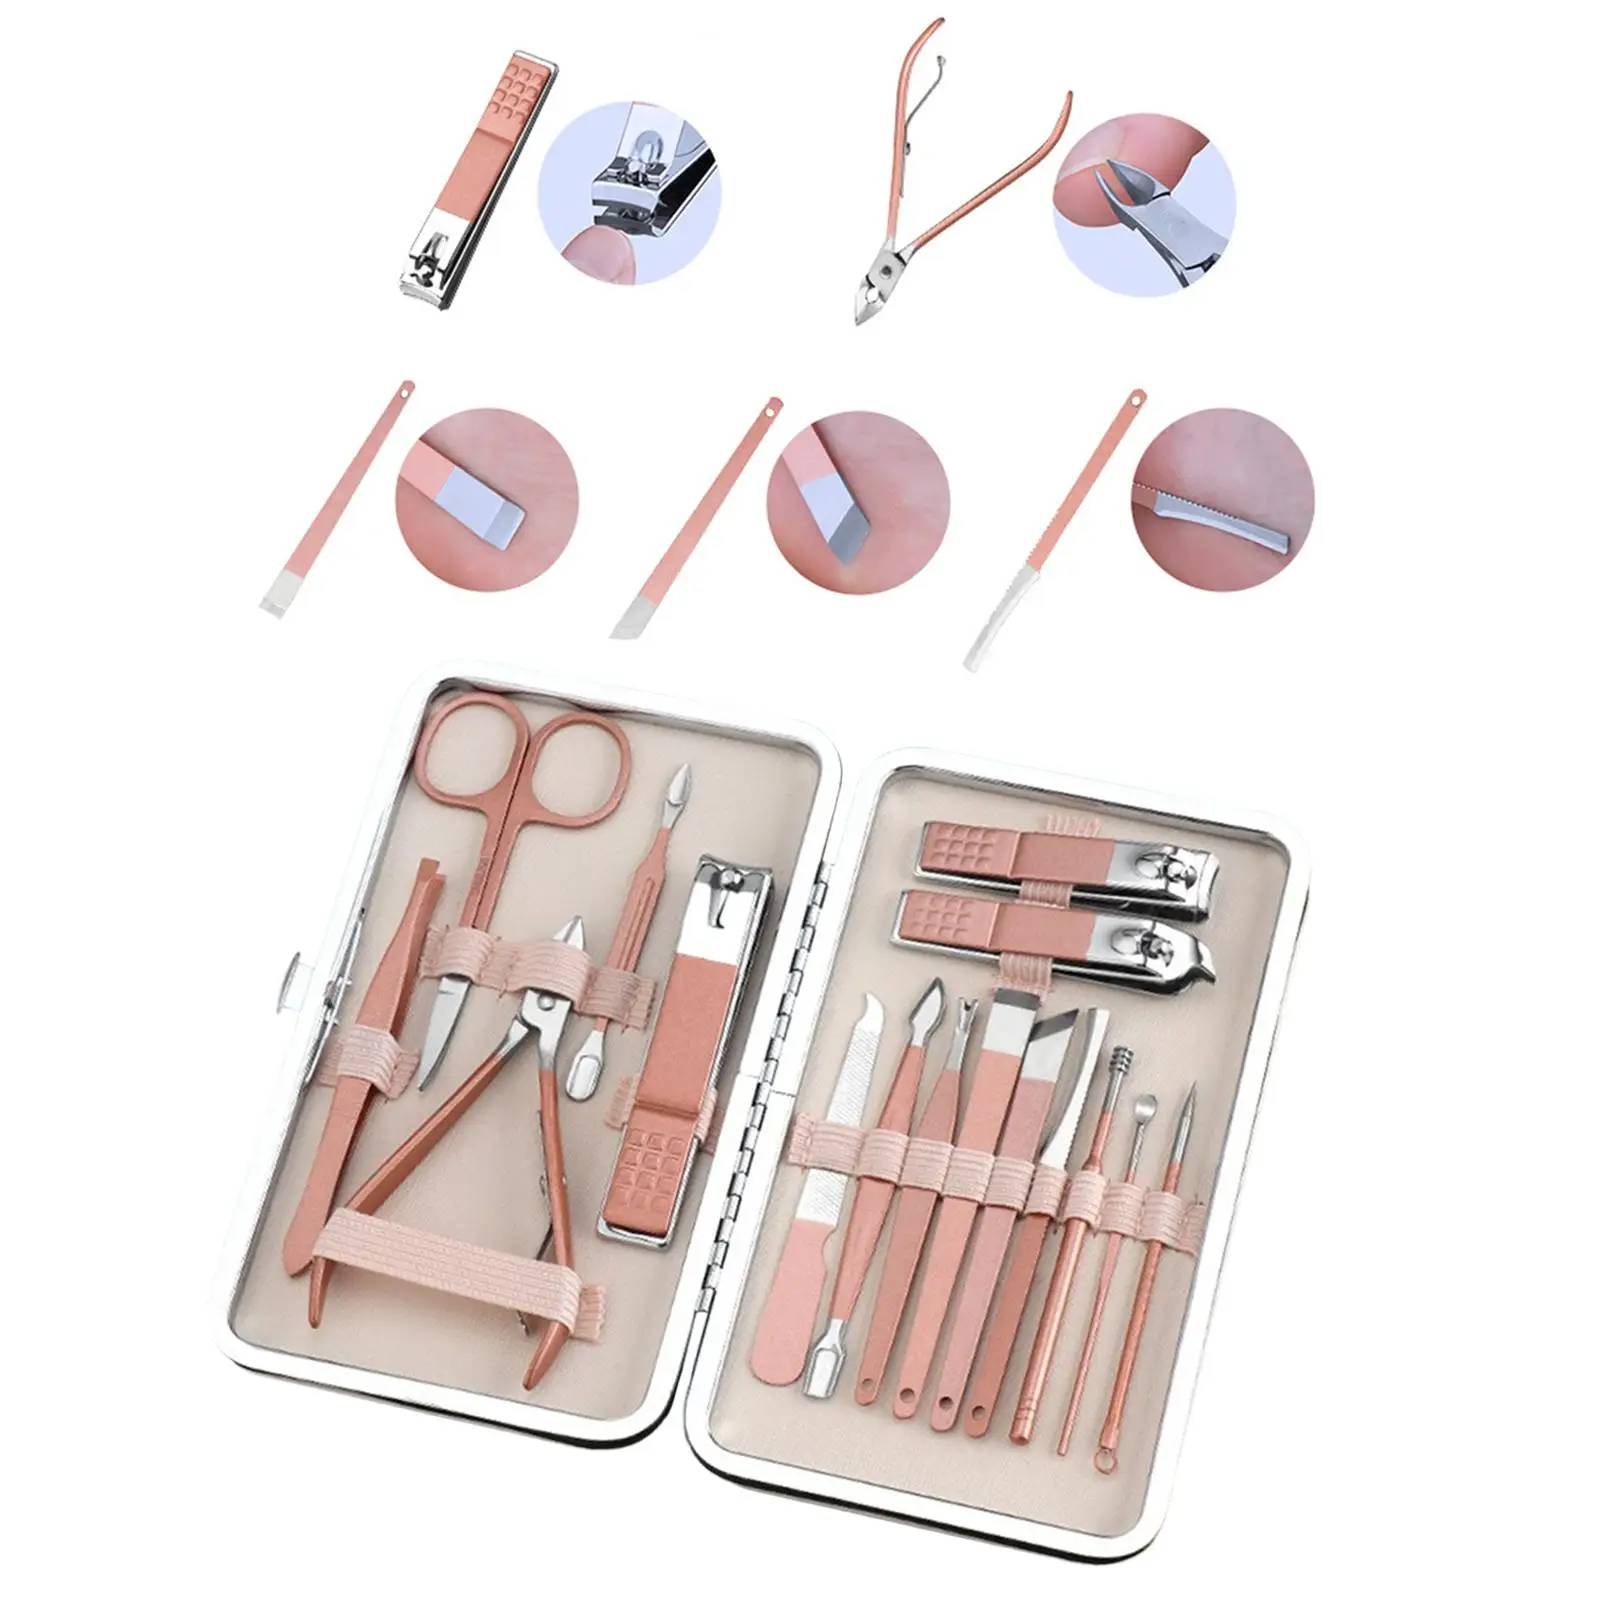 Manicure Set with Case Multifunction Nail Clippers for Gift Parents , Aureate 18 pieces